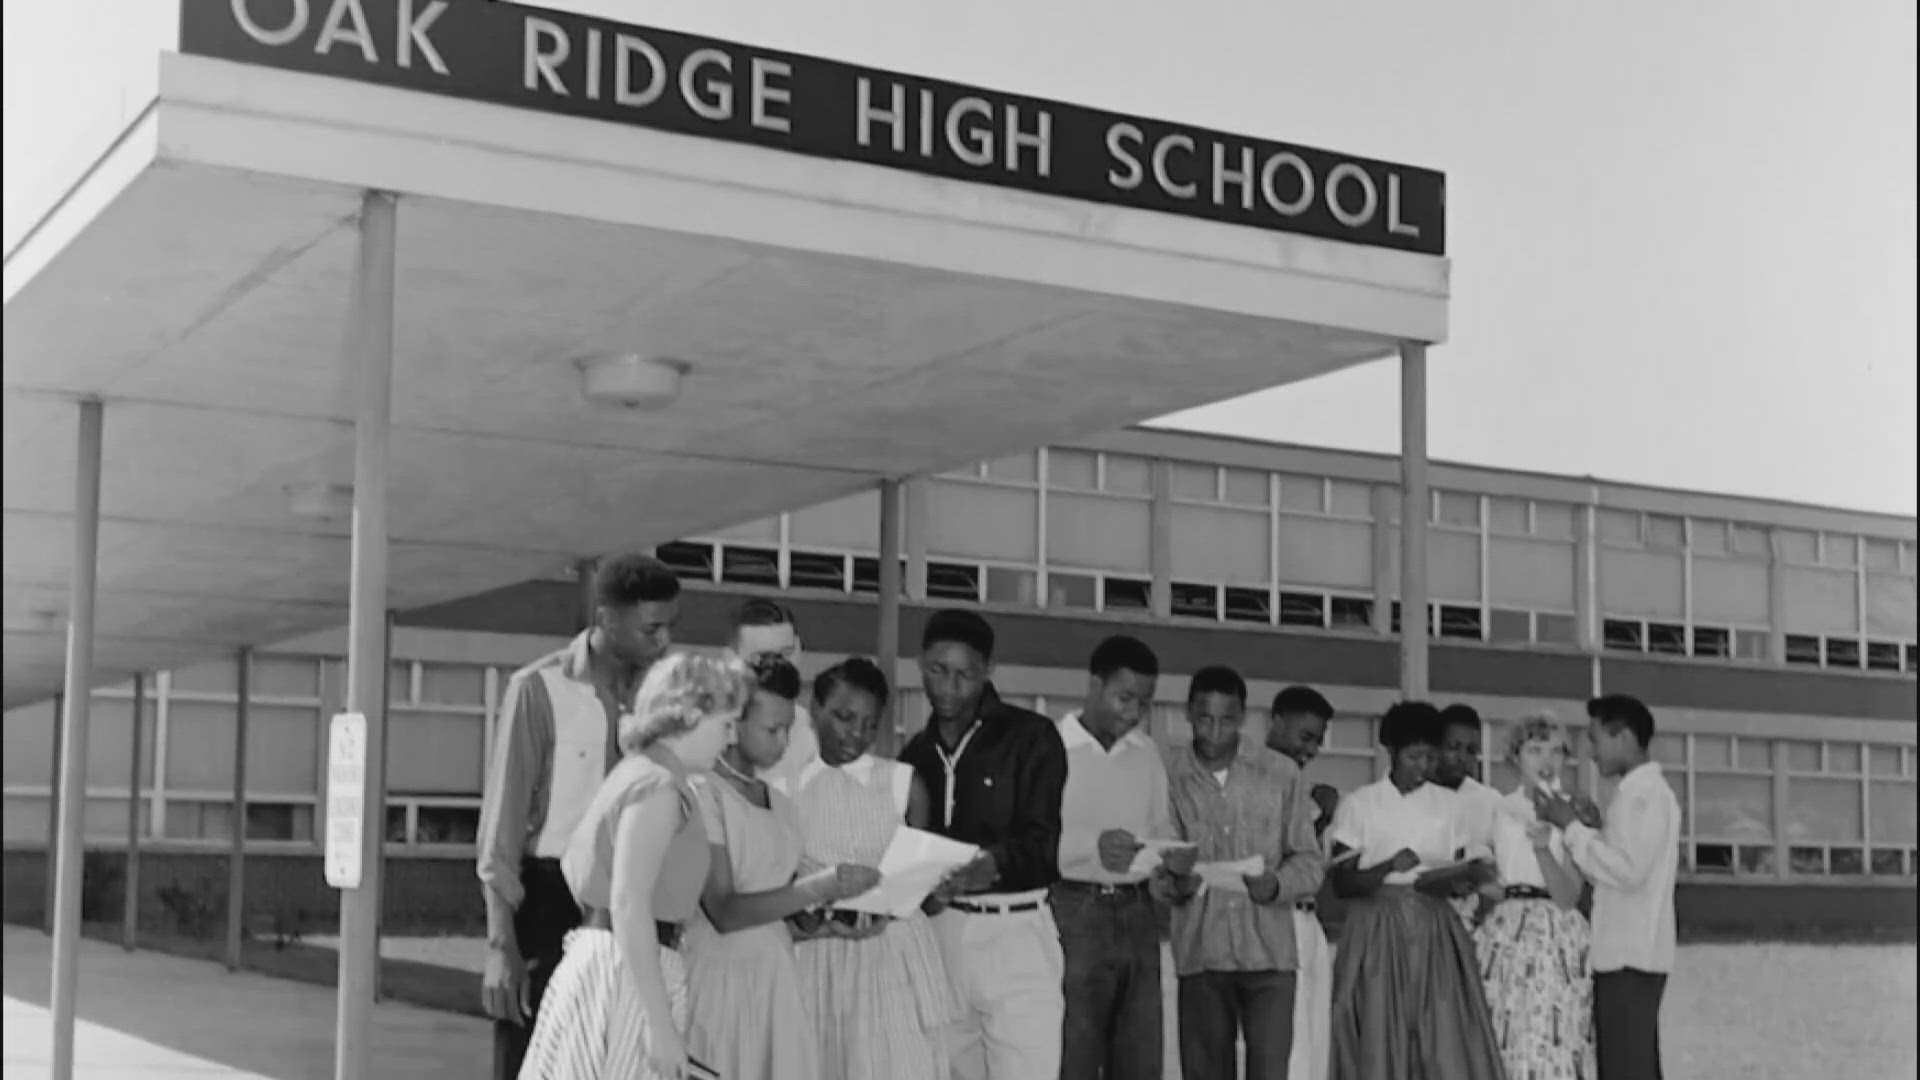 Leaders in Oak Ridge have been pushing to make sure students learn about the story of the Scarboro 85.